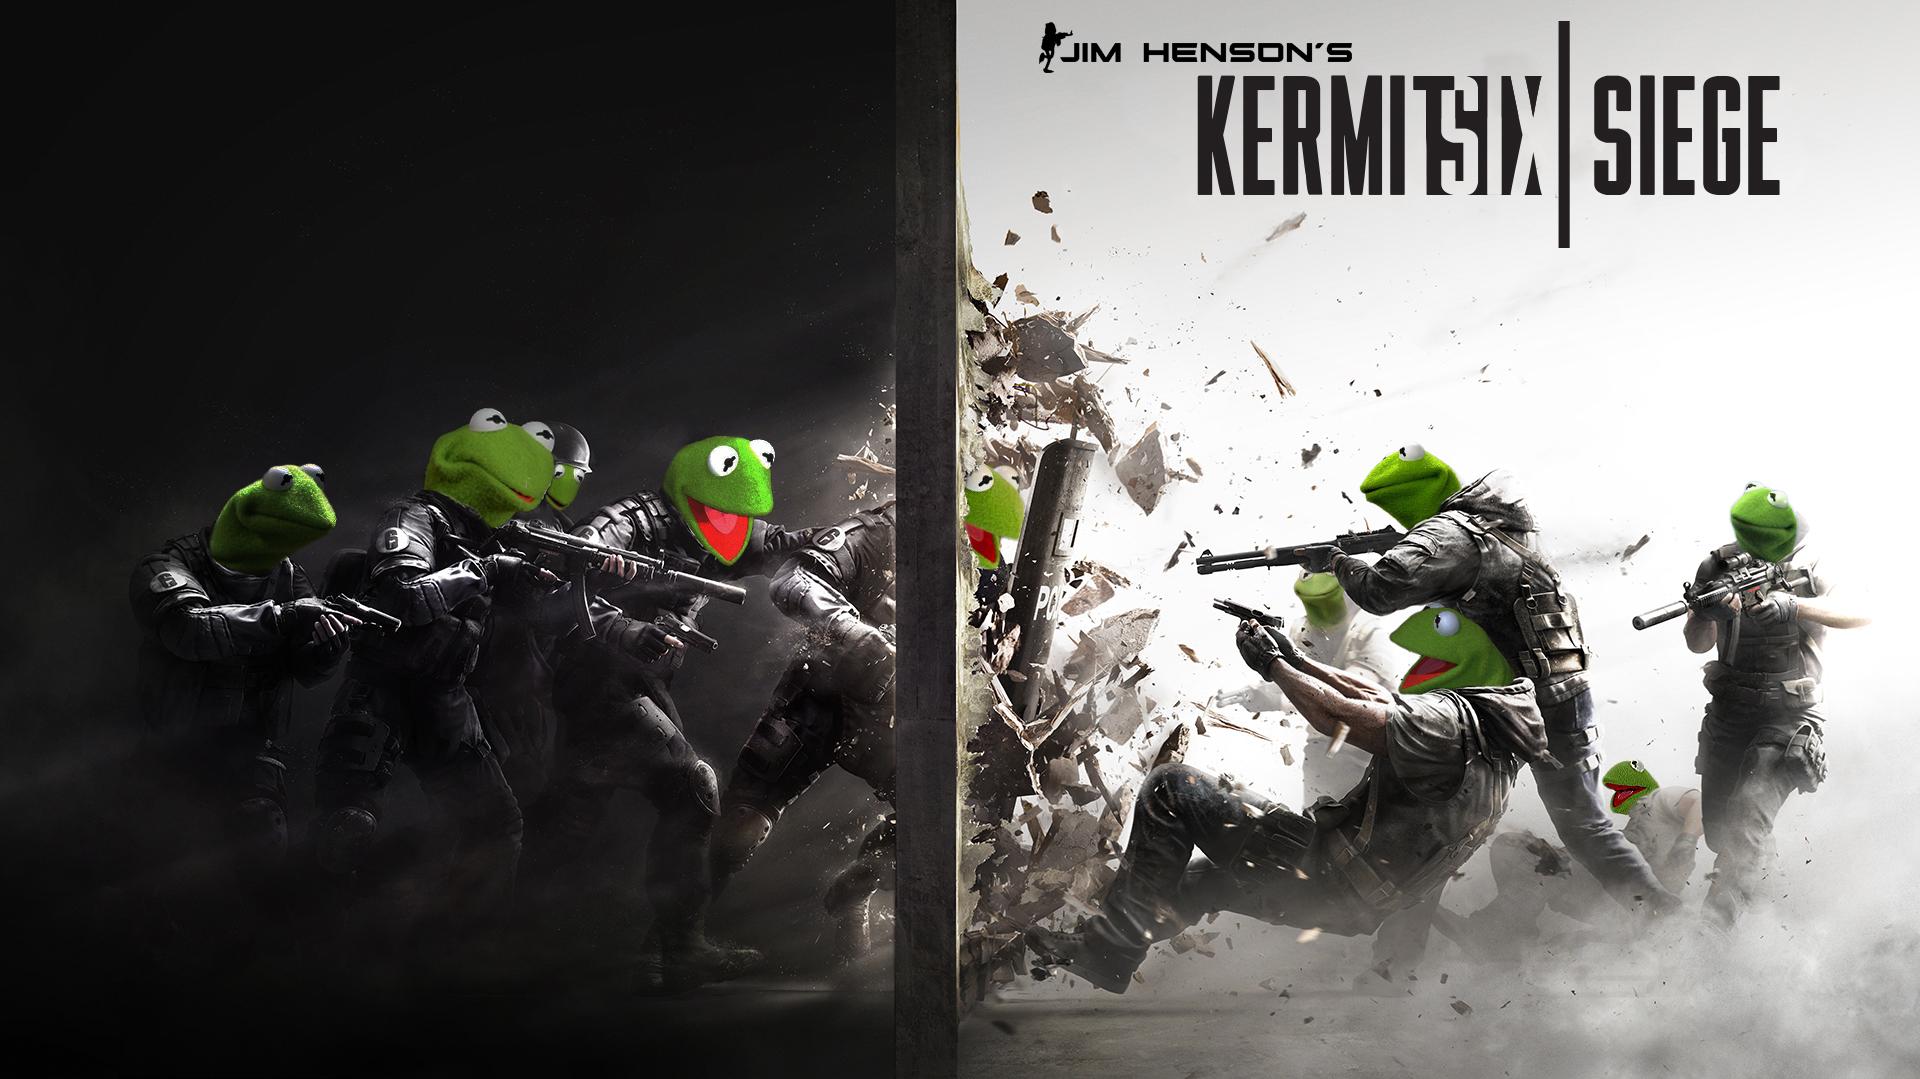 I made a wallpaper for a friend who f*cking loves Kermit, figured